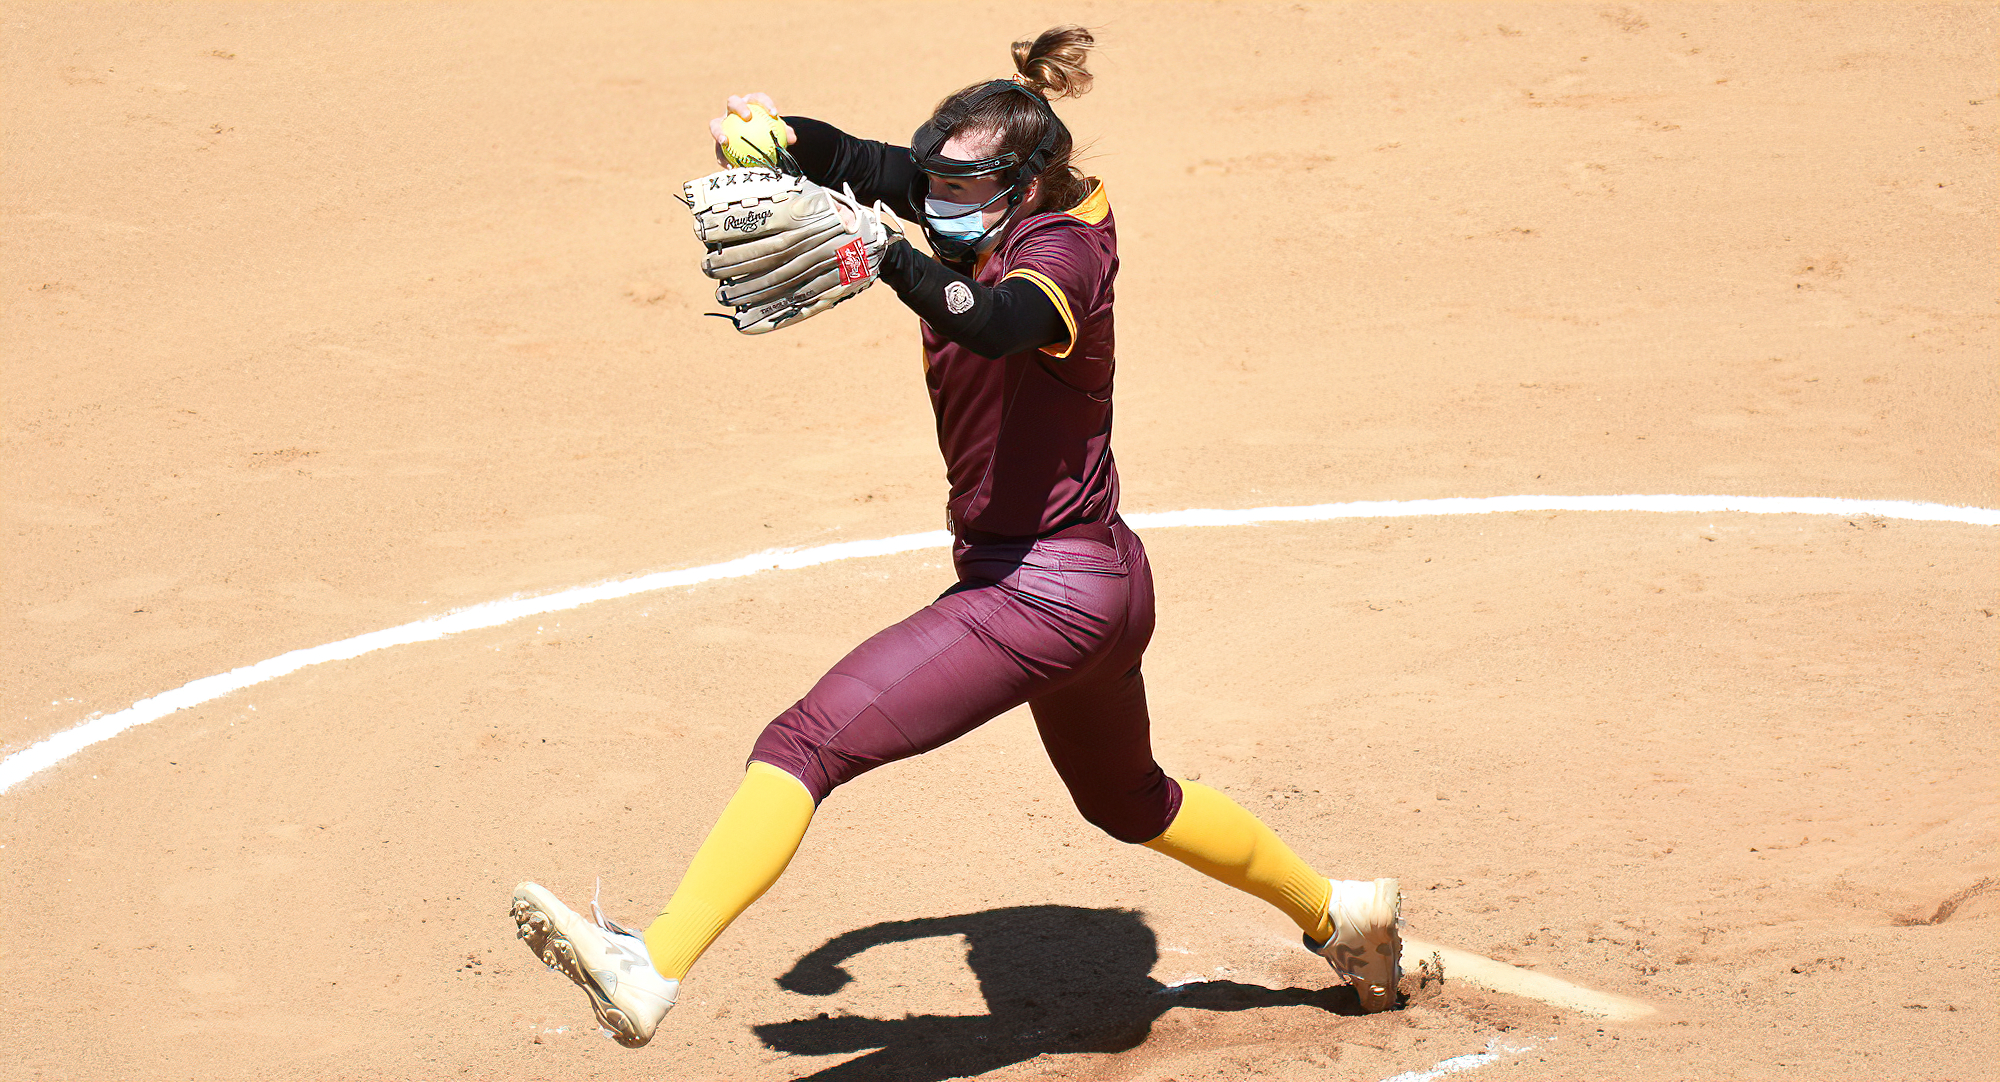 Senior Megan Gavin struck out 15 batters in the Cobbers' 7-1 win over Elizabethtown in the team's first game in Florida.